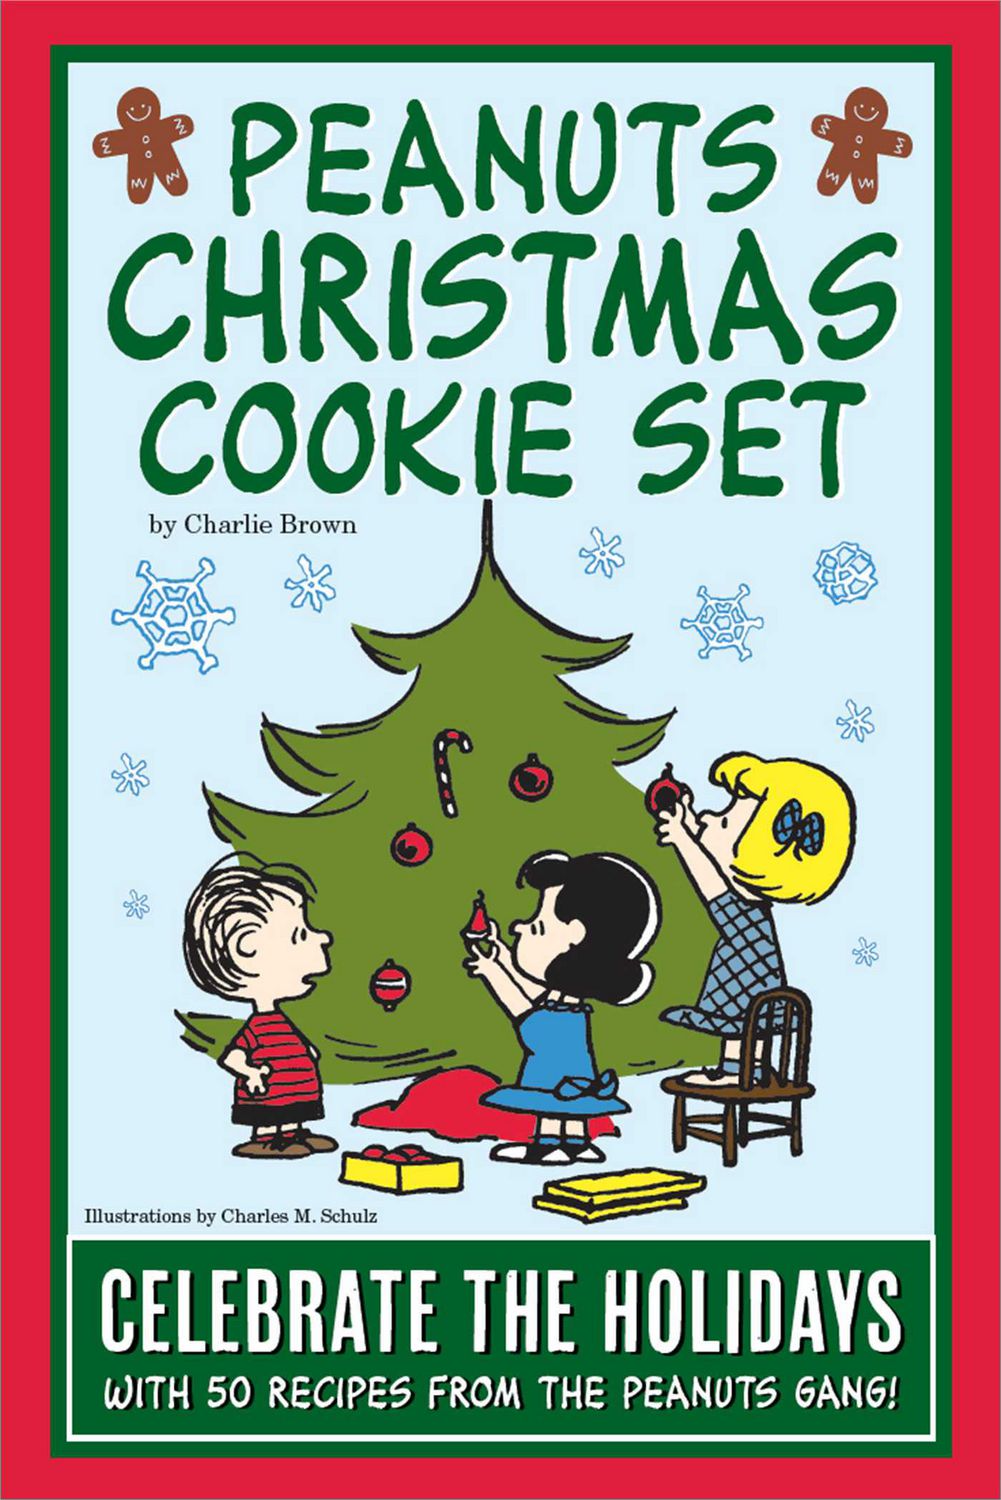 Peanuts Christmas Cookie Set: Celebrate The Holidays With 50